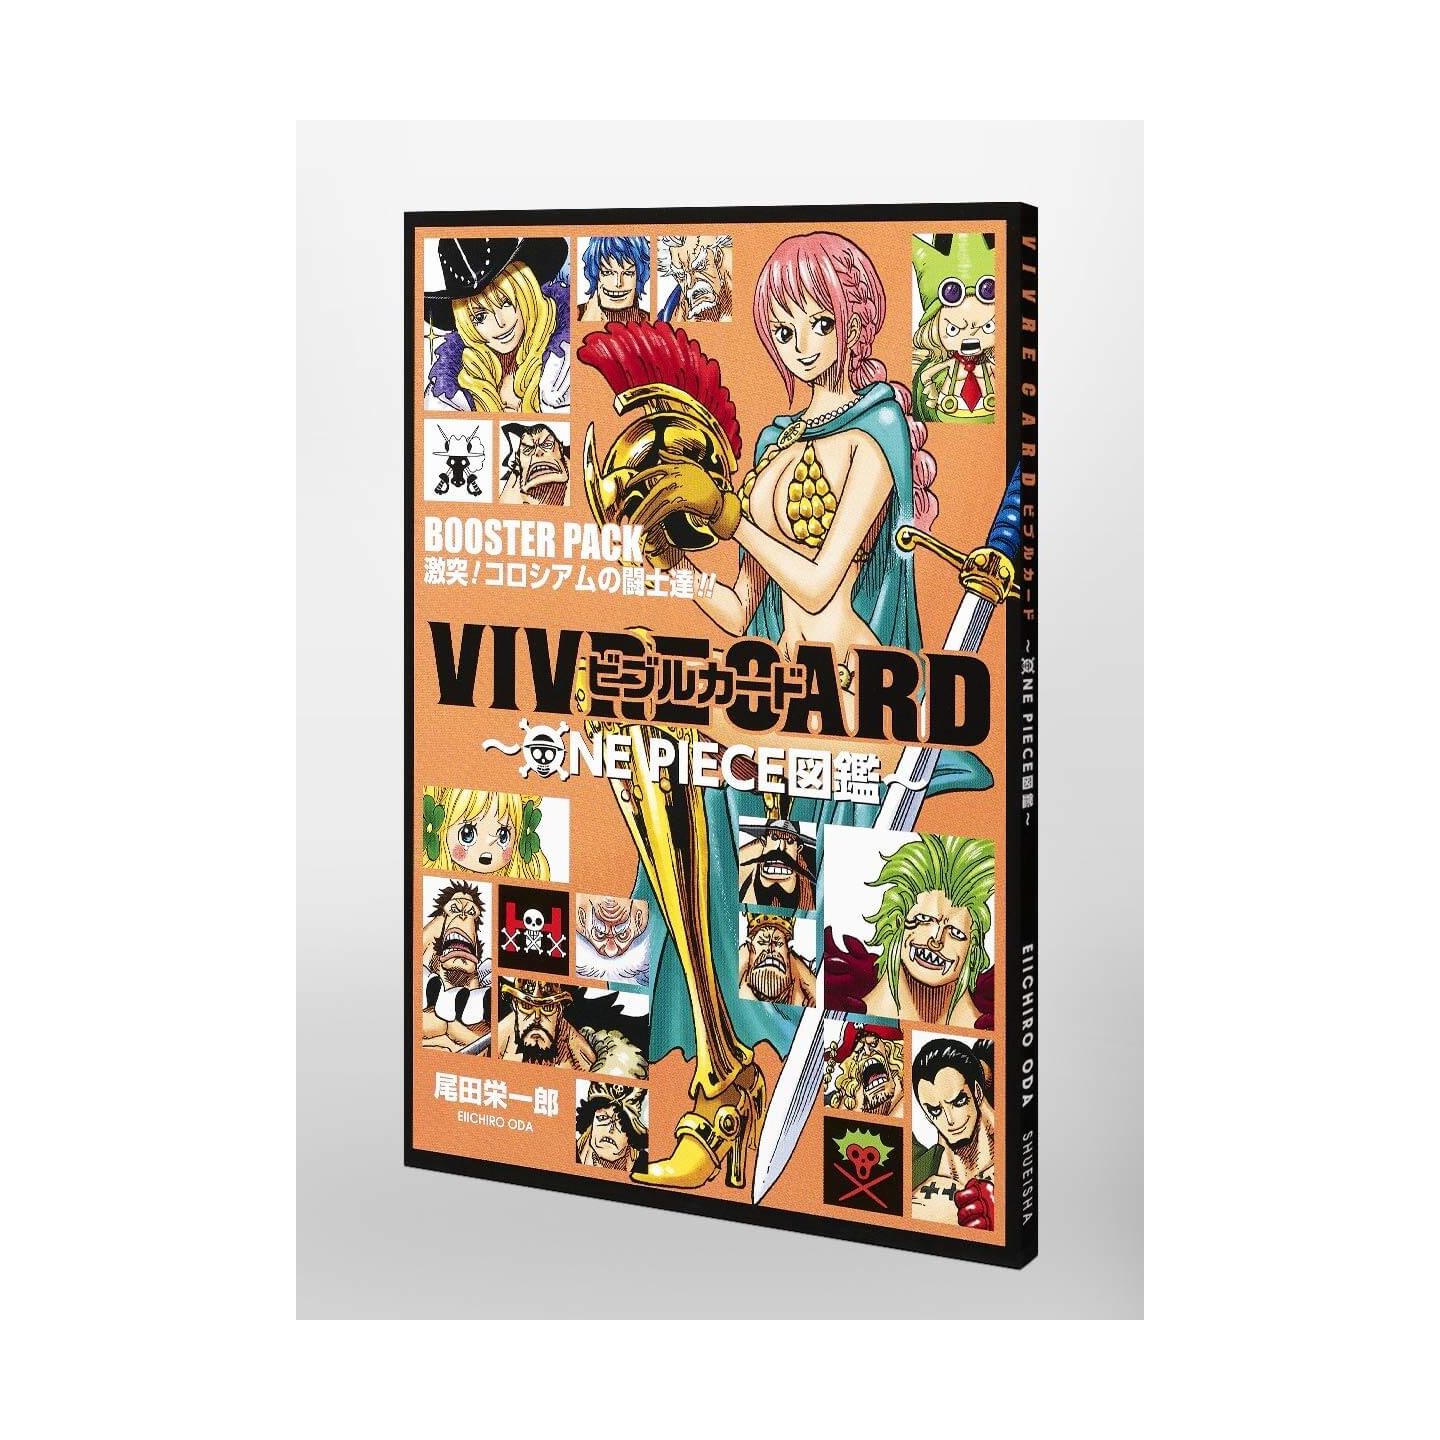 Vivre Card One Piece図鑑 Booster Pack 激突 コロシアムの闘士達 コミックス